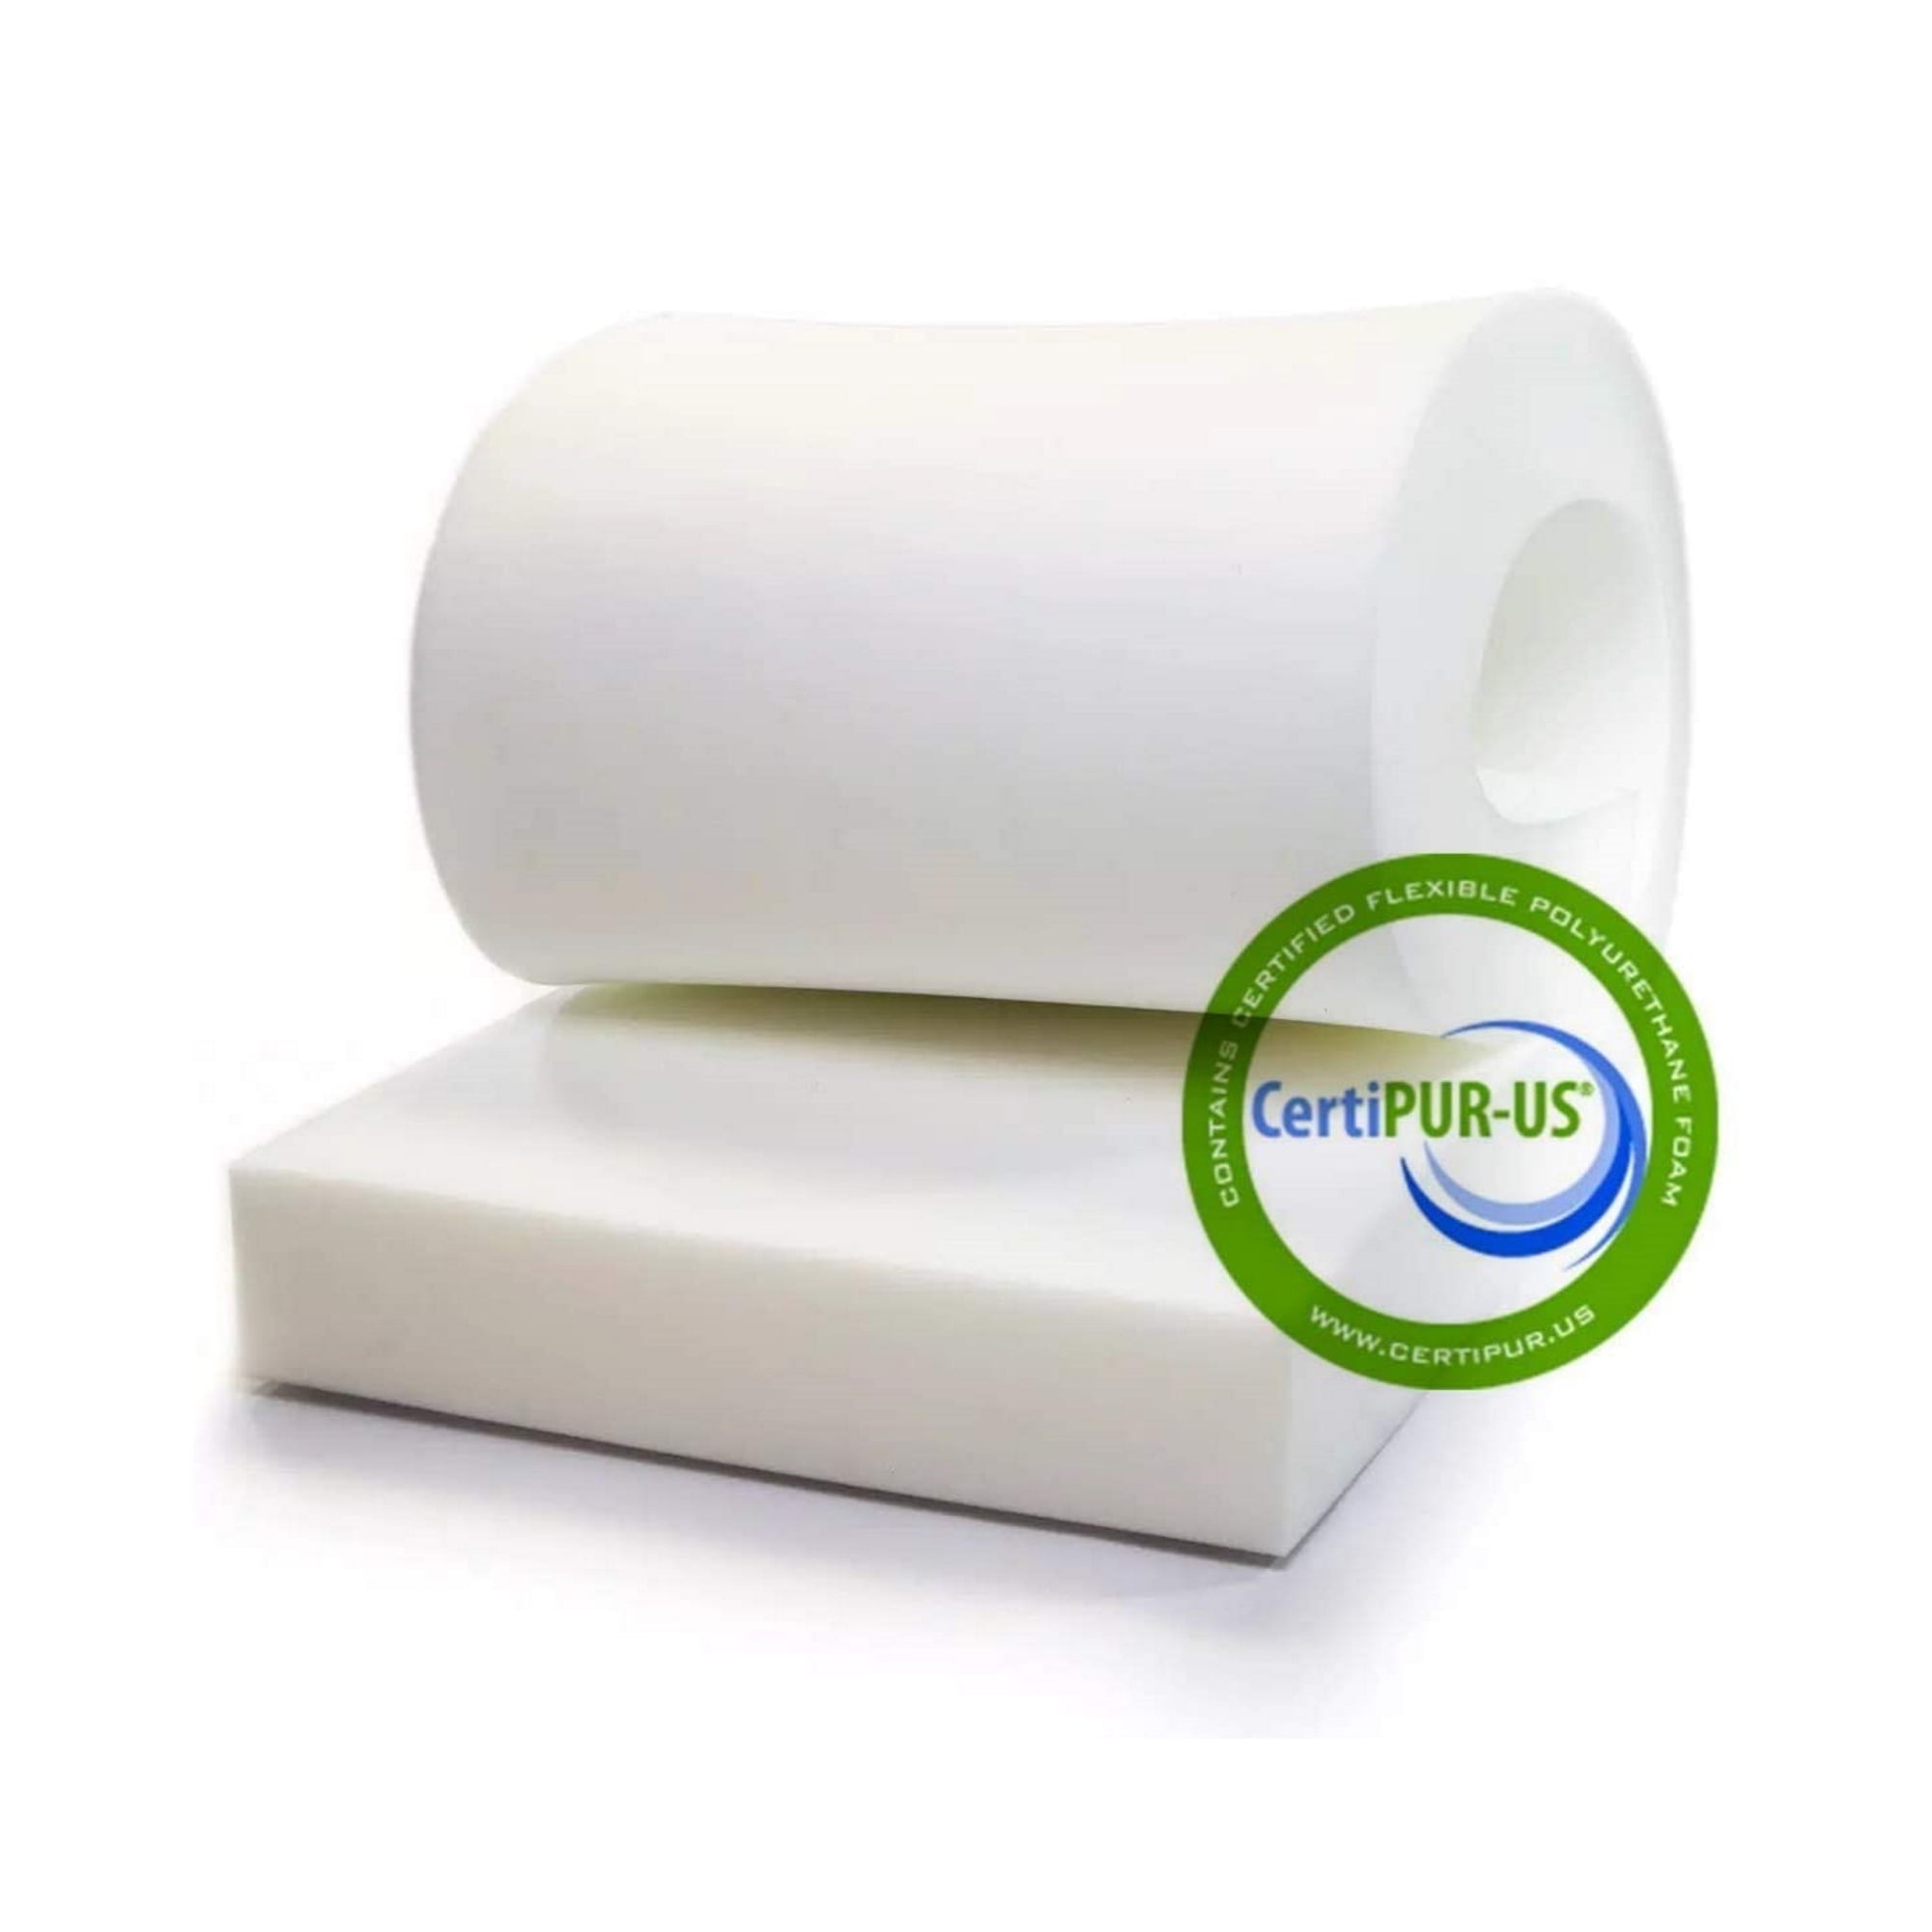 Upholstery foam sheets 80 x 20" in any thickness high density foam cushions pads